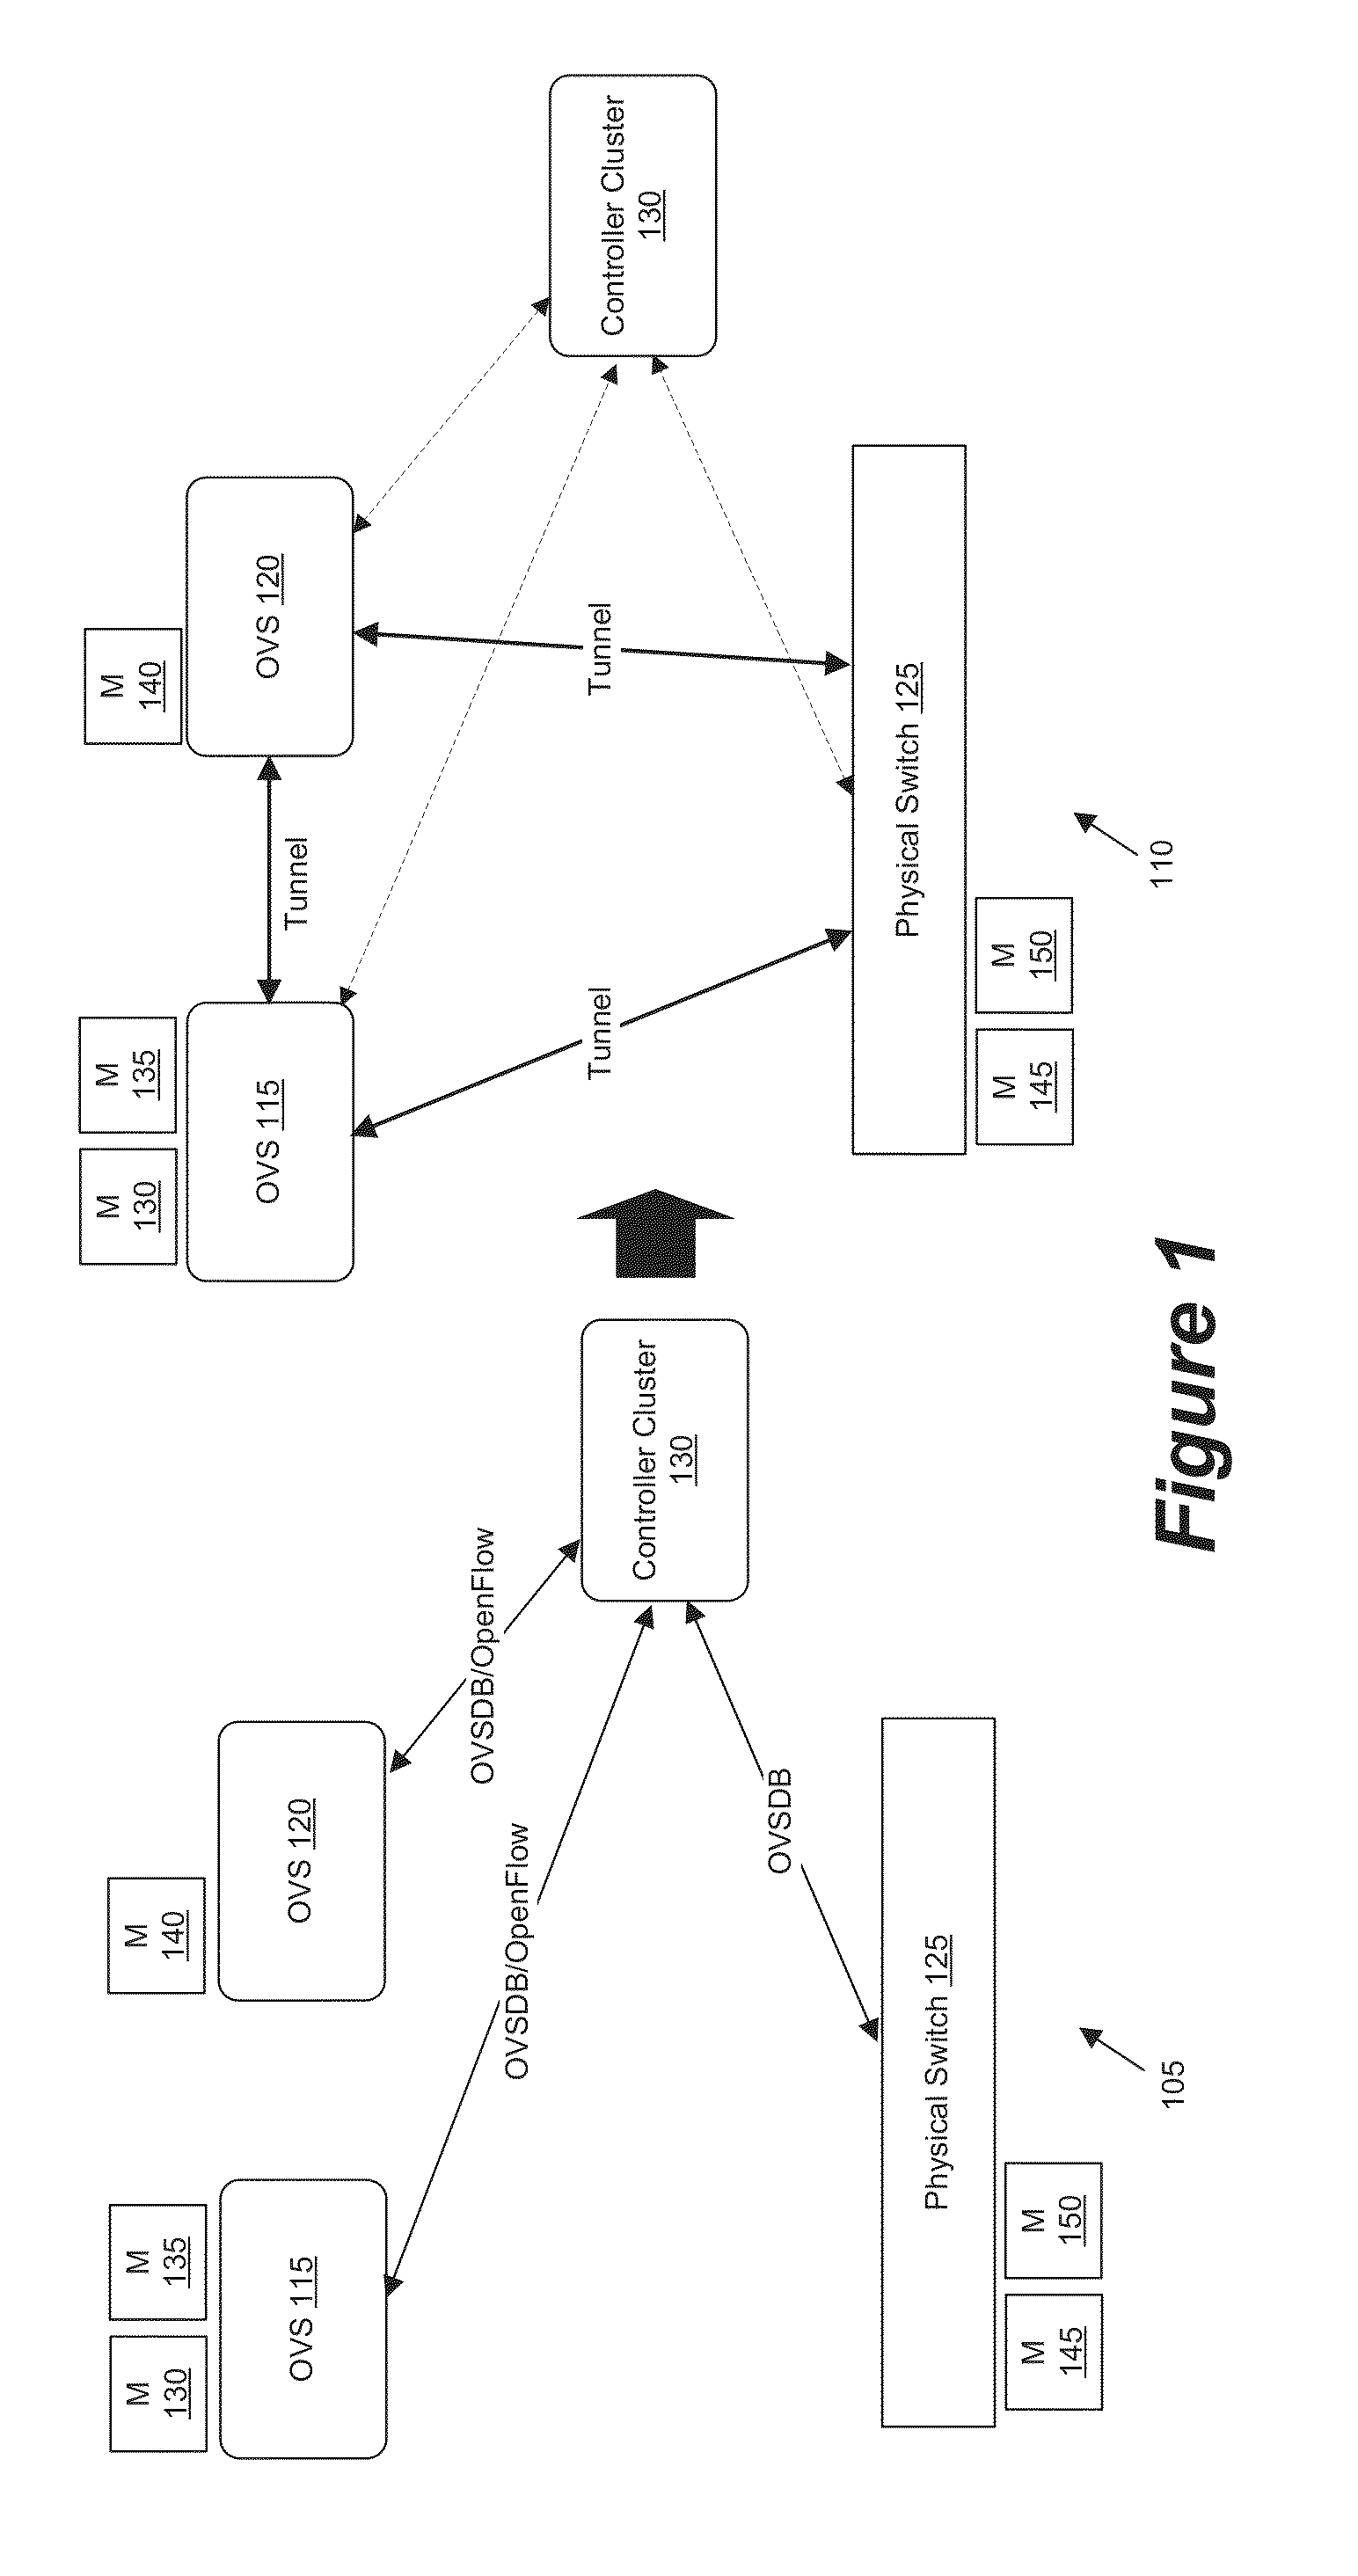 Network Controller for Managing Software and Hardware Forwarding Elements